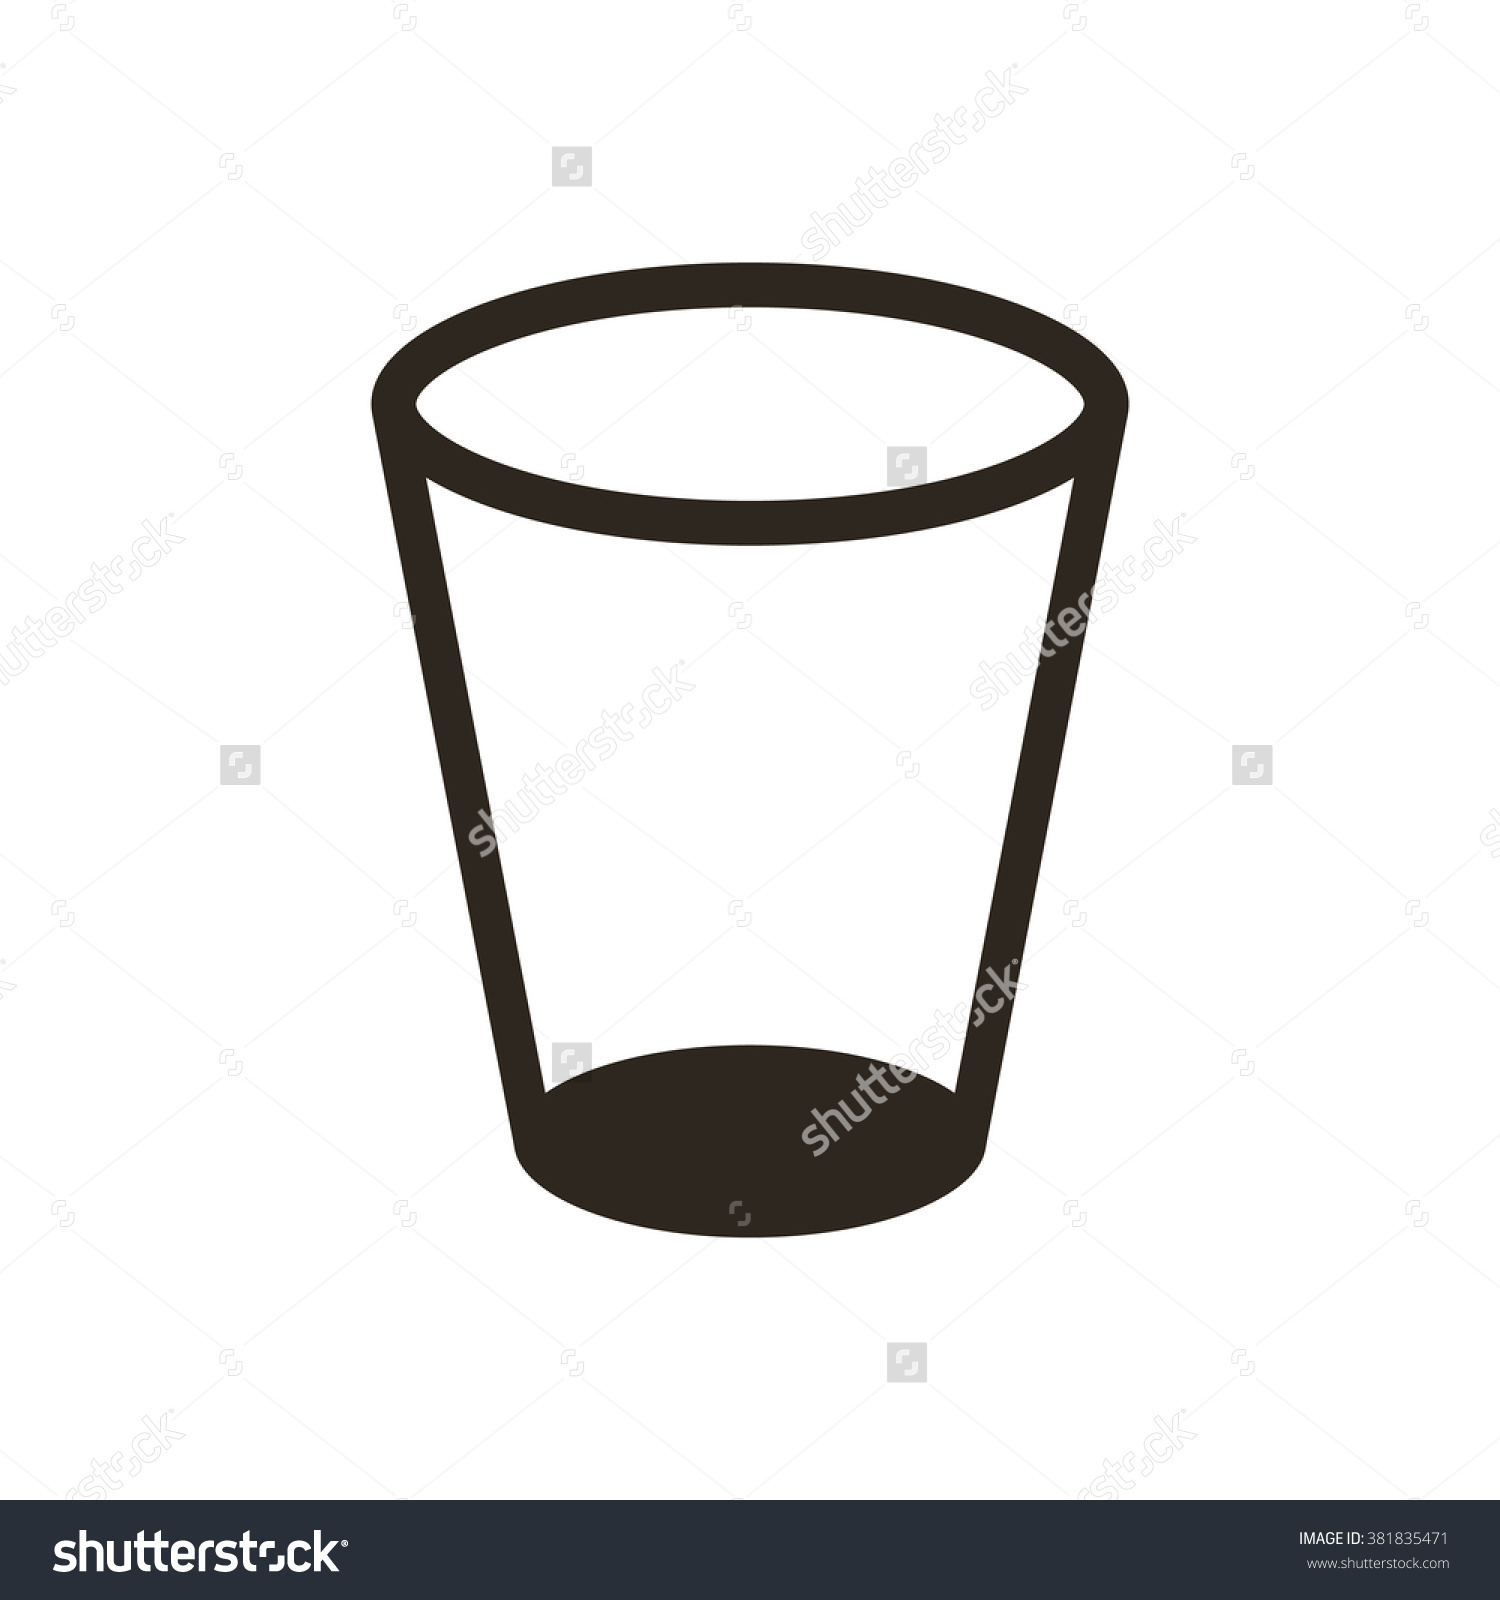 Stock Photo : Shutterstock. Stock Photo : Shutterstock. Preview Clipart